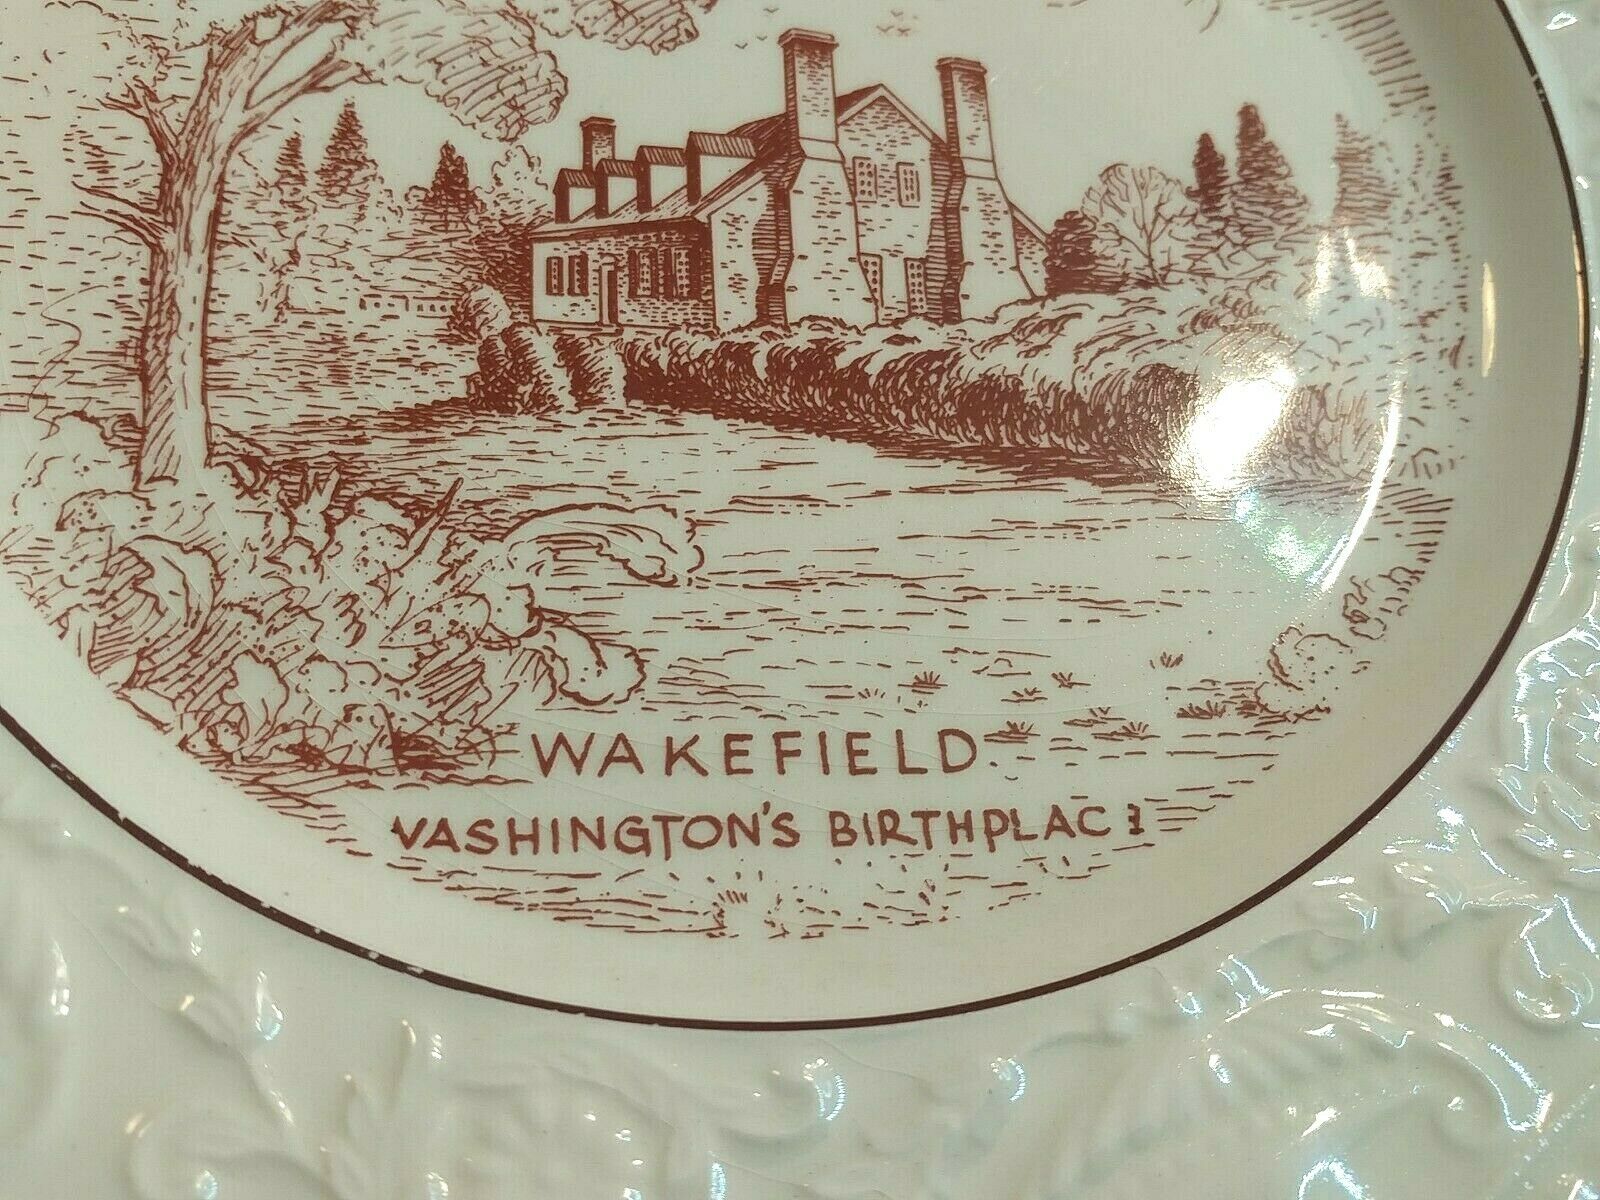 Adam Antique By Steubenville Collector Plate Wakefield Washington’s Birthplace